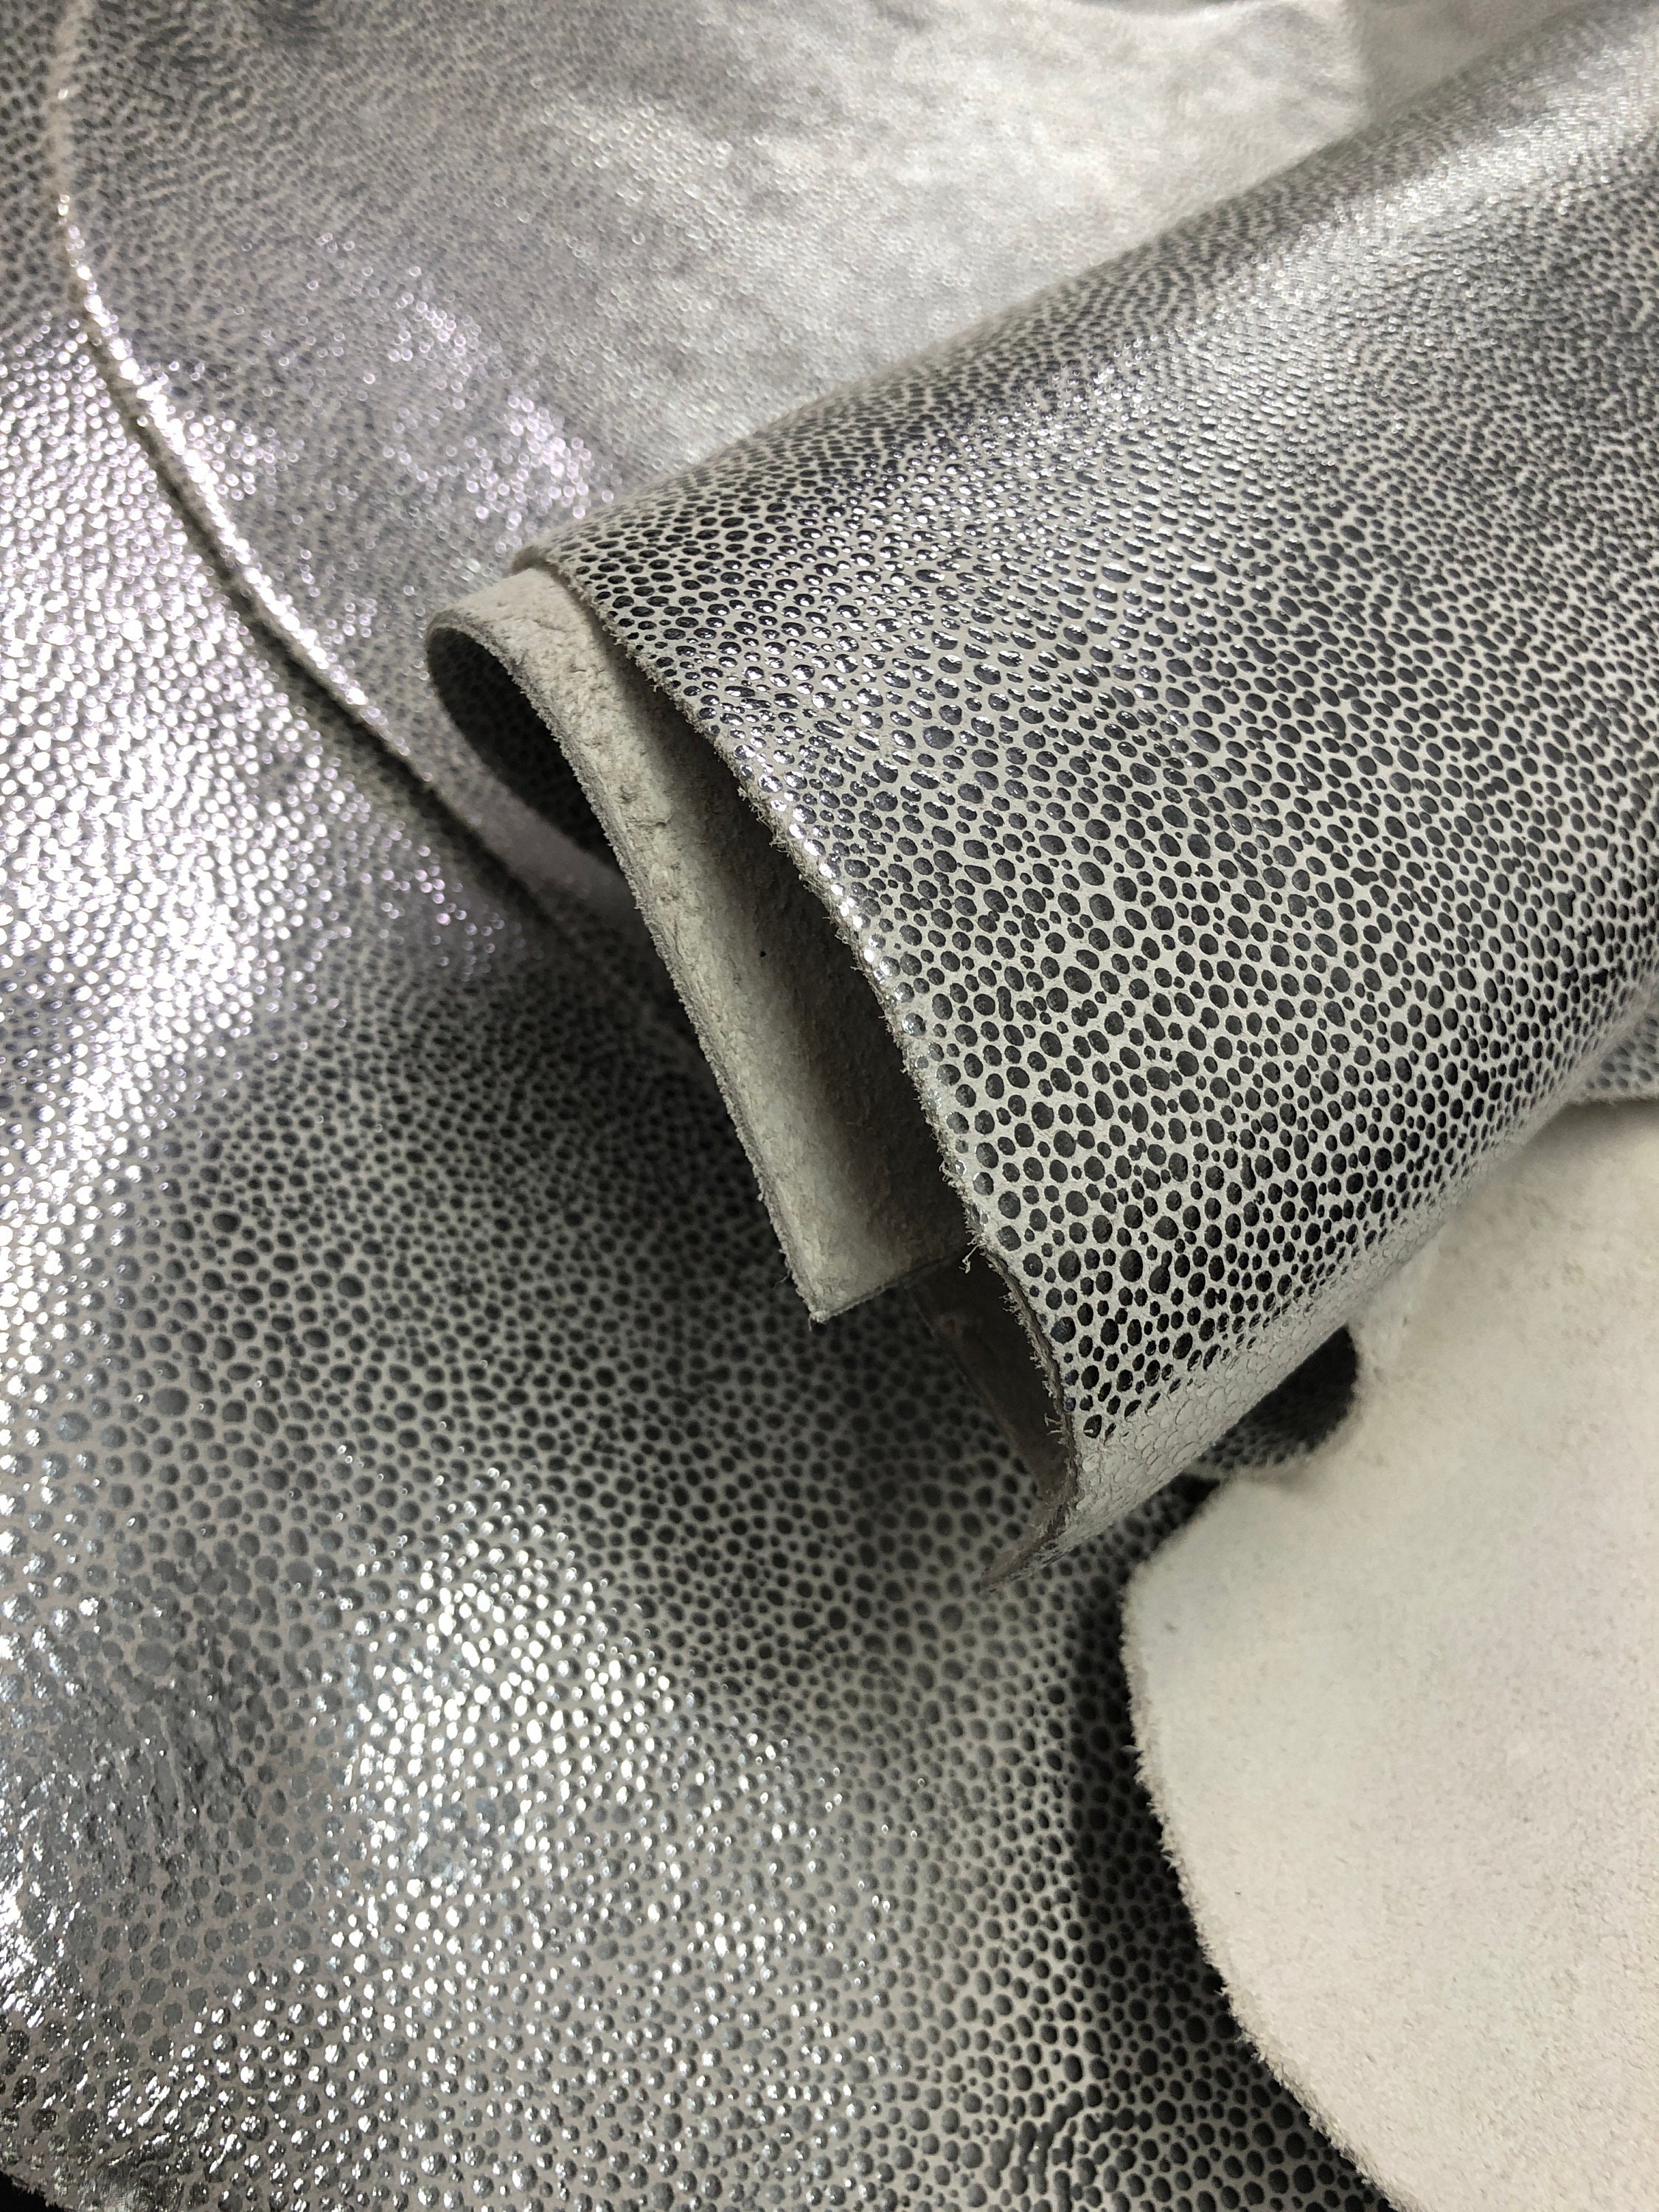 Silver Leather Fabric Shiny Metallic Skin Real Leather Genuine Leather  Material for Sewing and Handcrafting DARK SILVER DUST 826, 0.8mm/2oz 